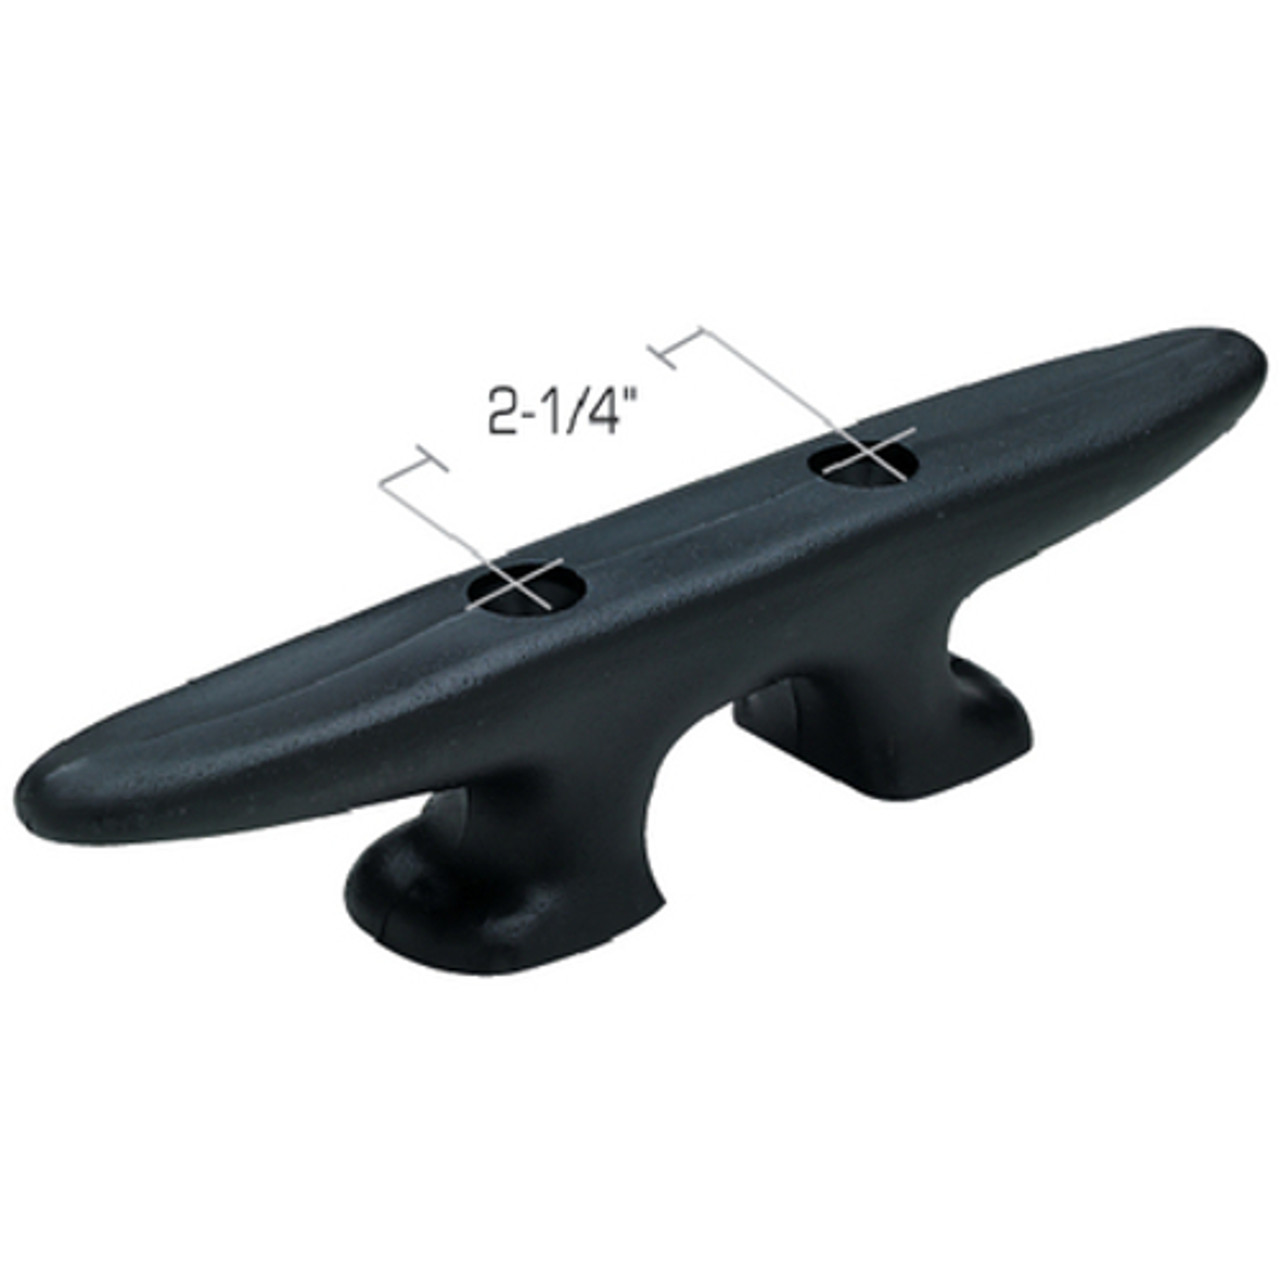 8 Inch Black Plastic Hollow Base Cleat for Boats and Docks